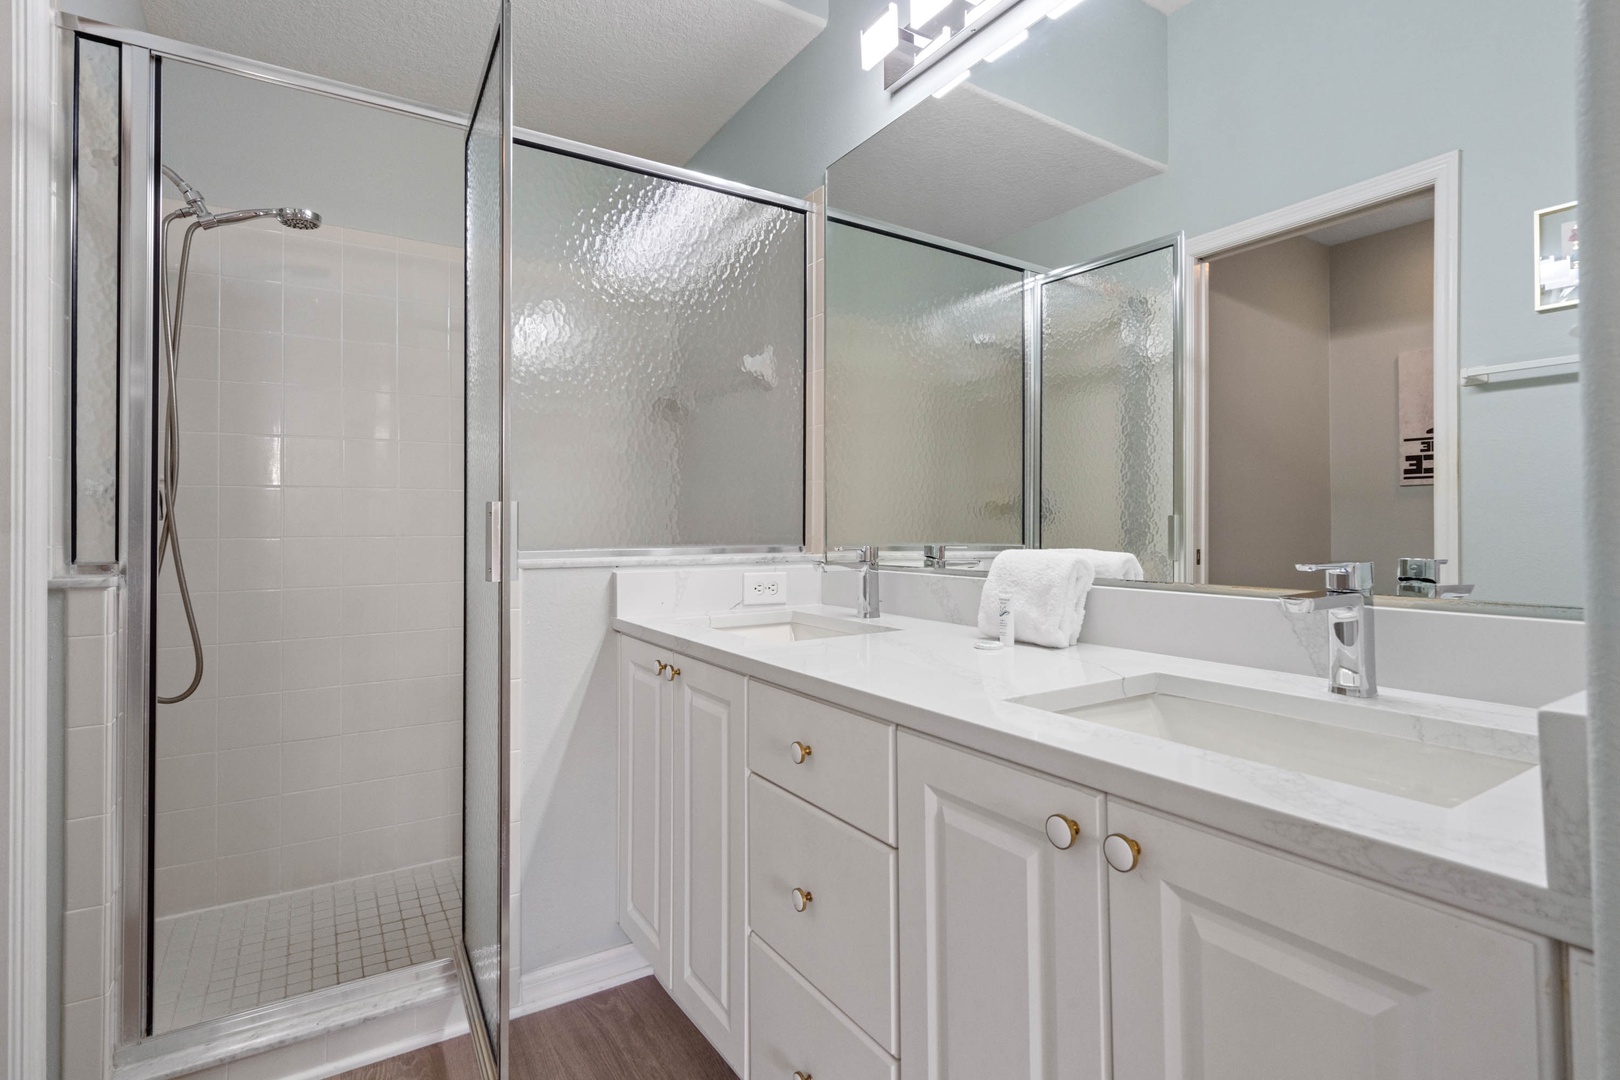 The King En Suite boasts a spacious Double Vanity and Glass Shower